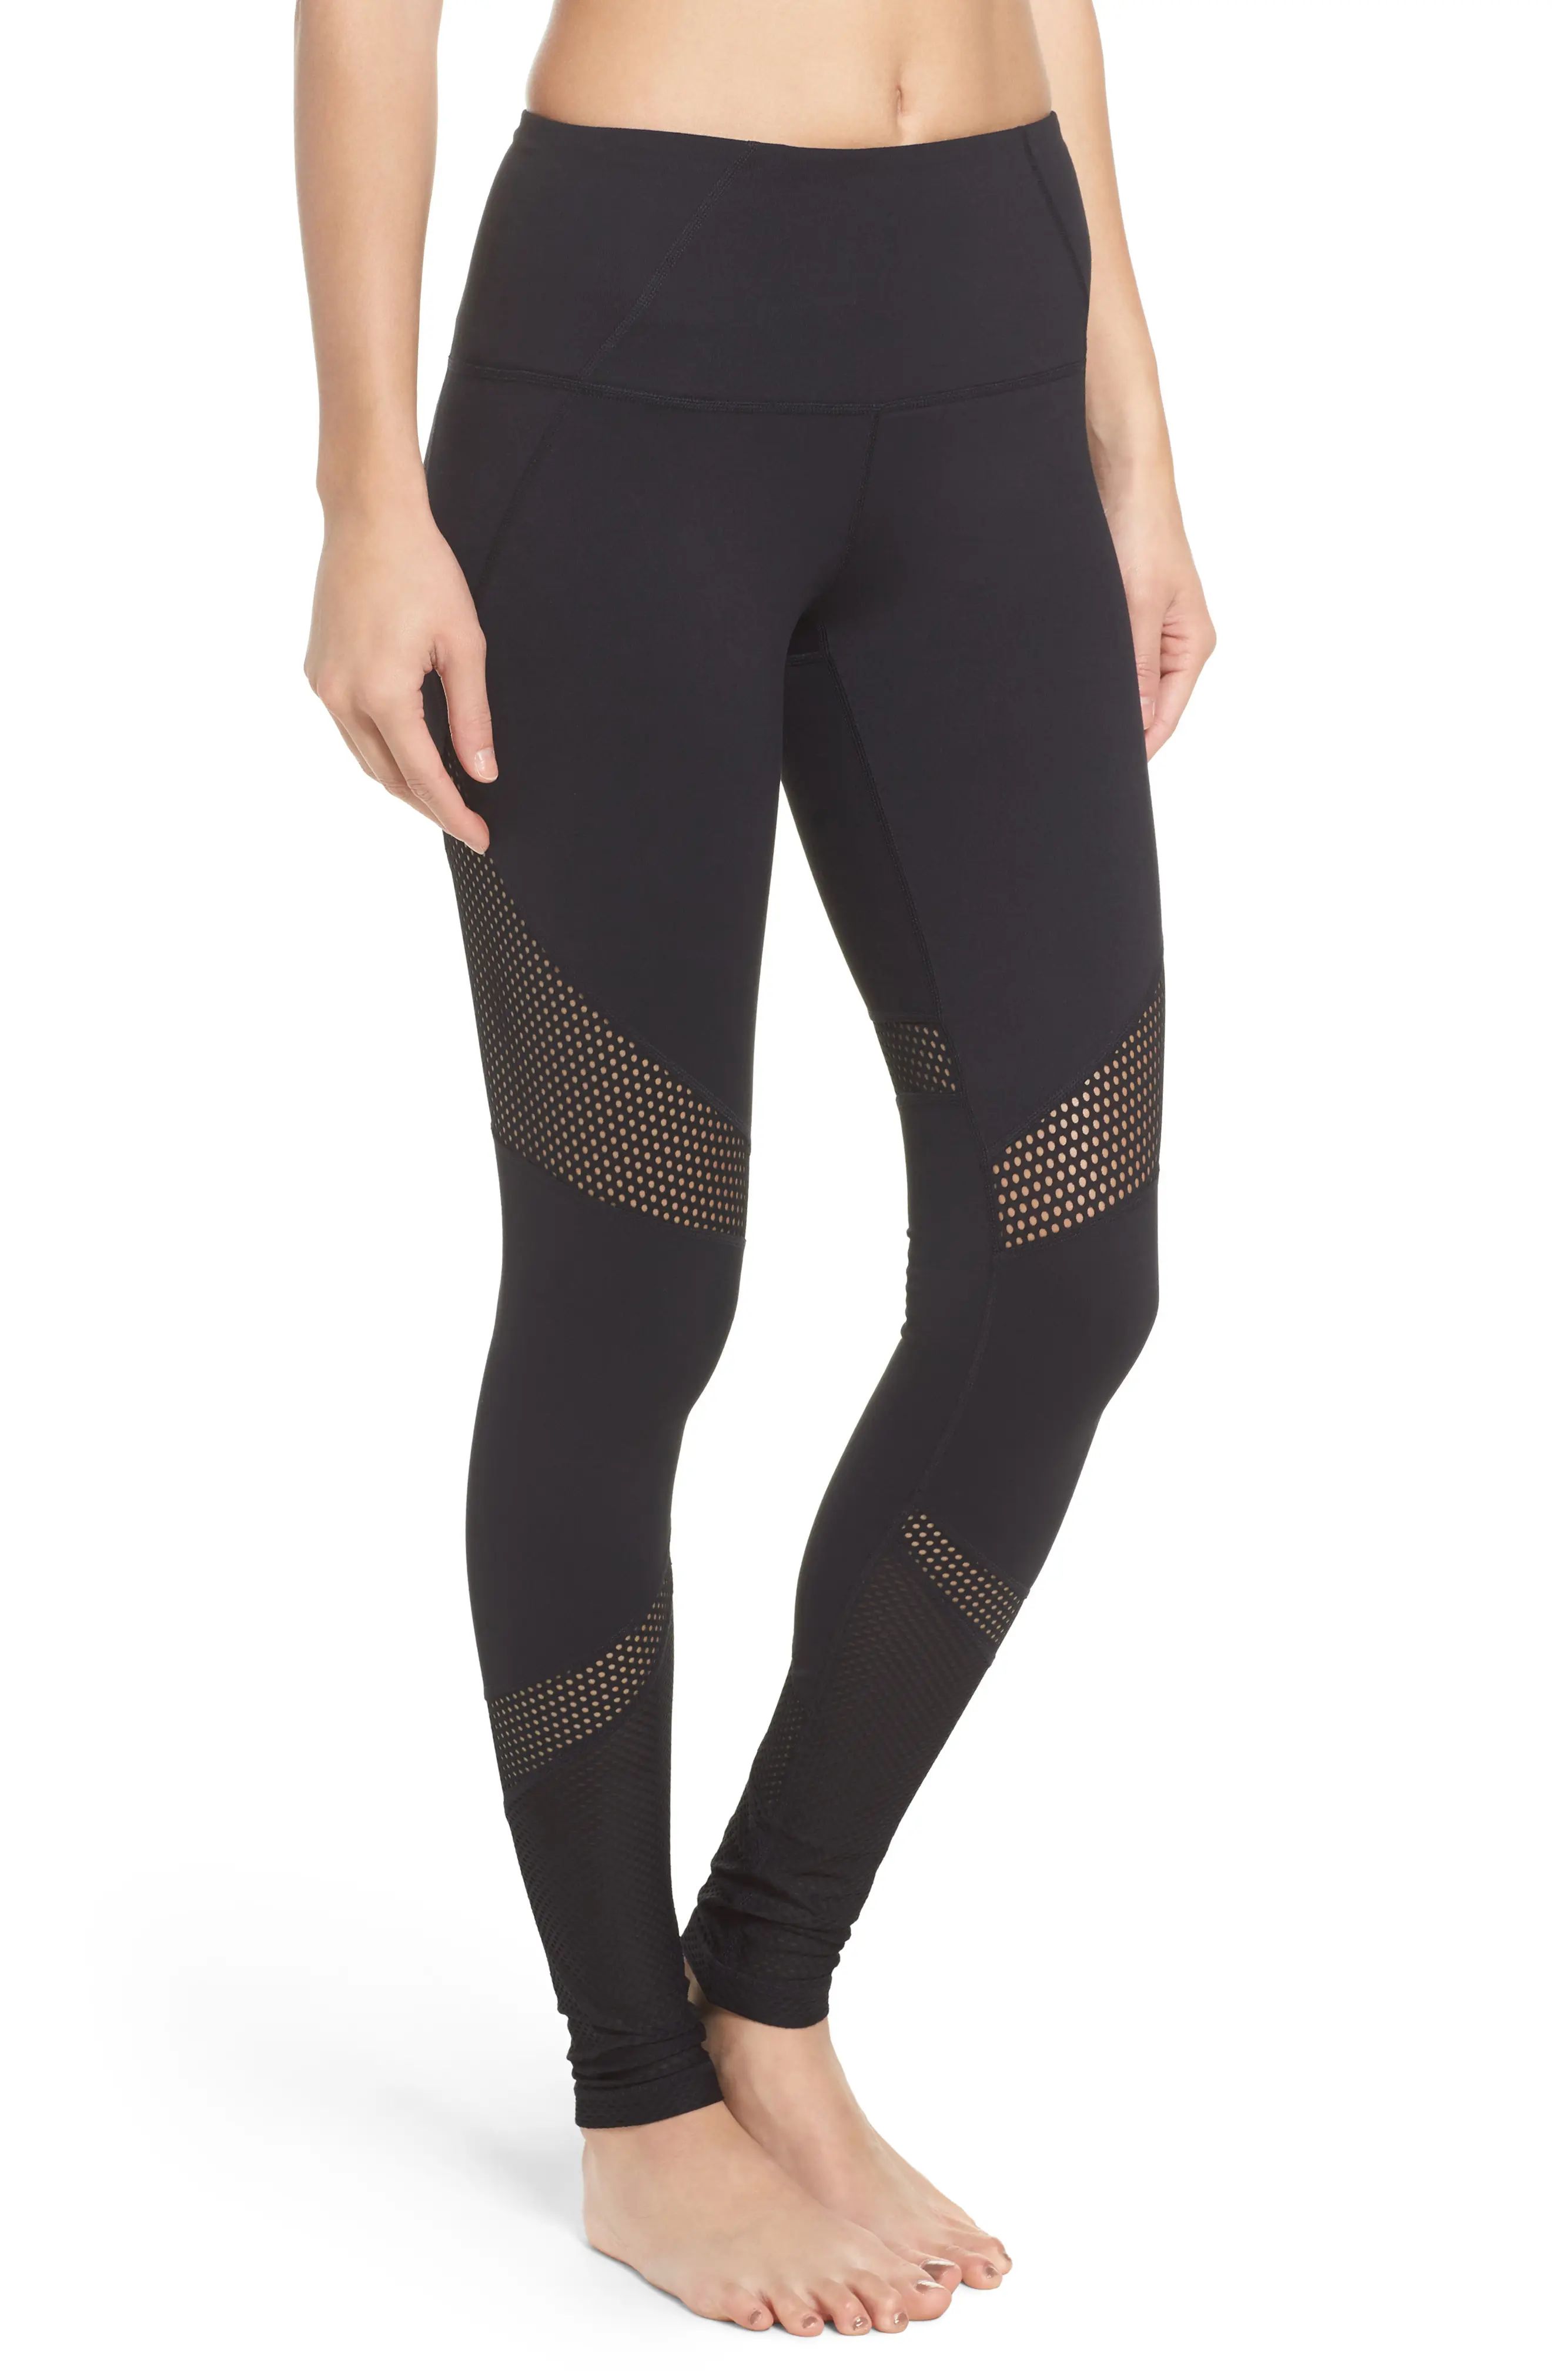 Out of Bounds High Waist Leggings | Nordstrom